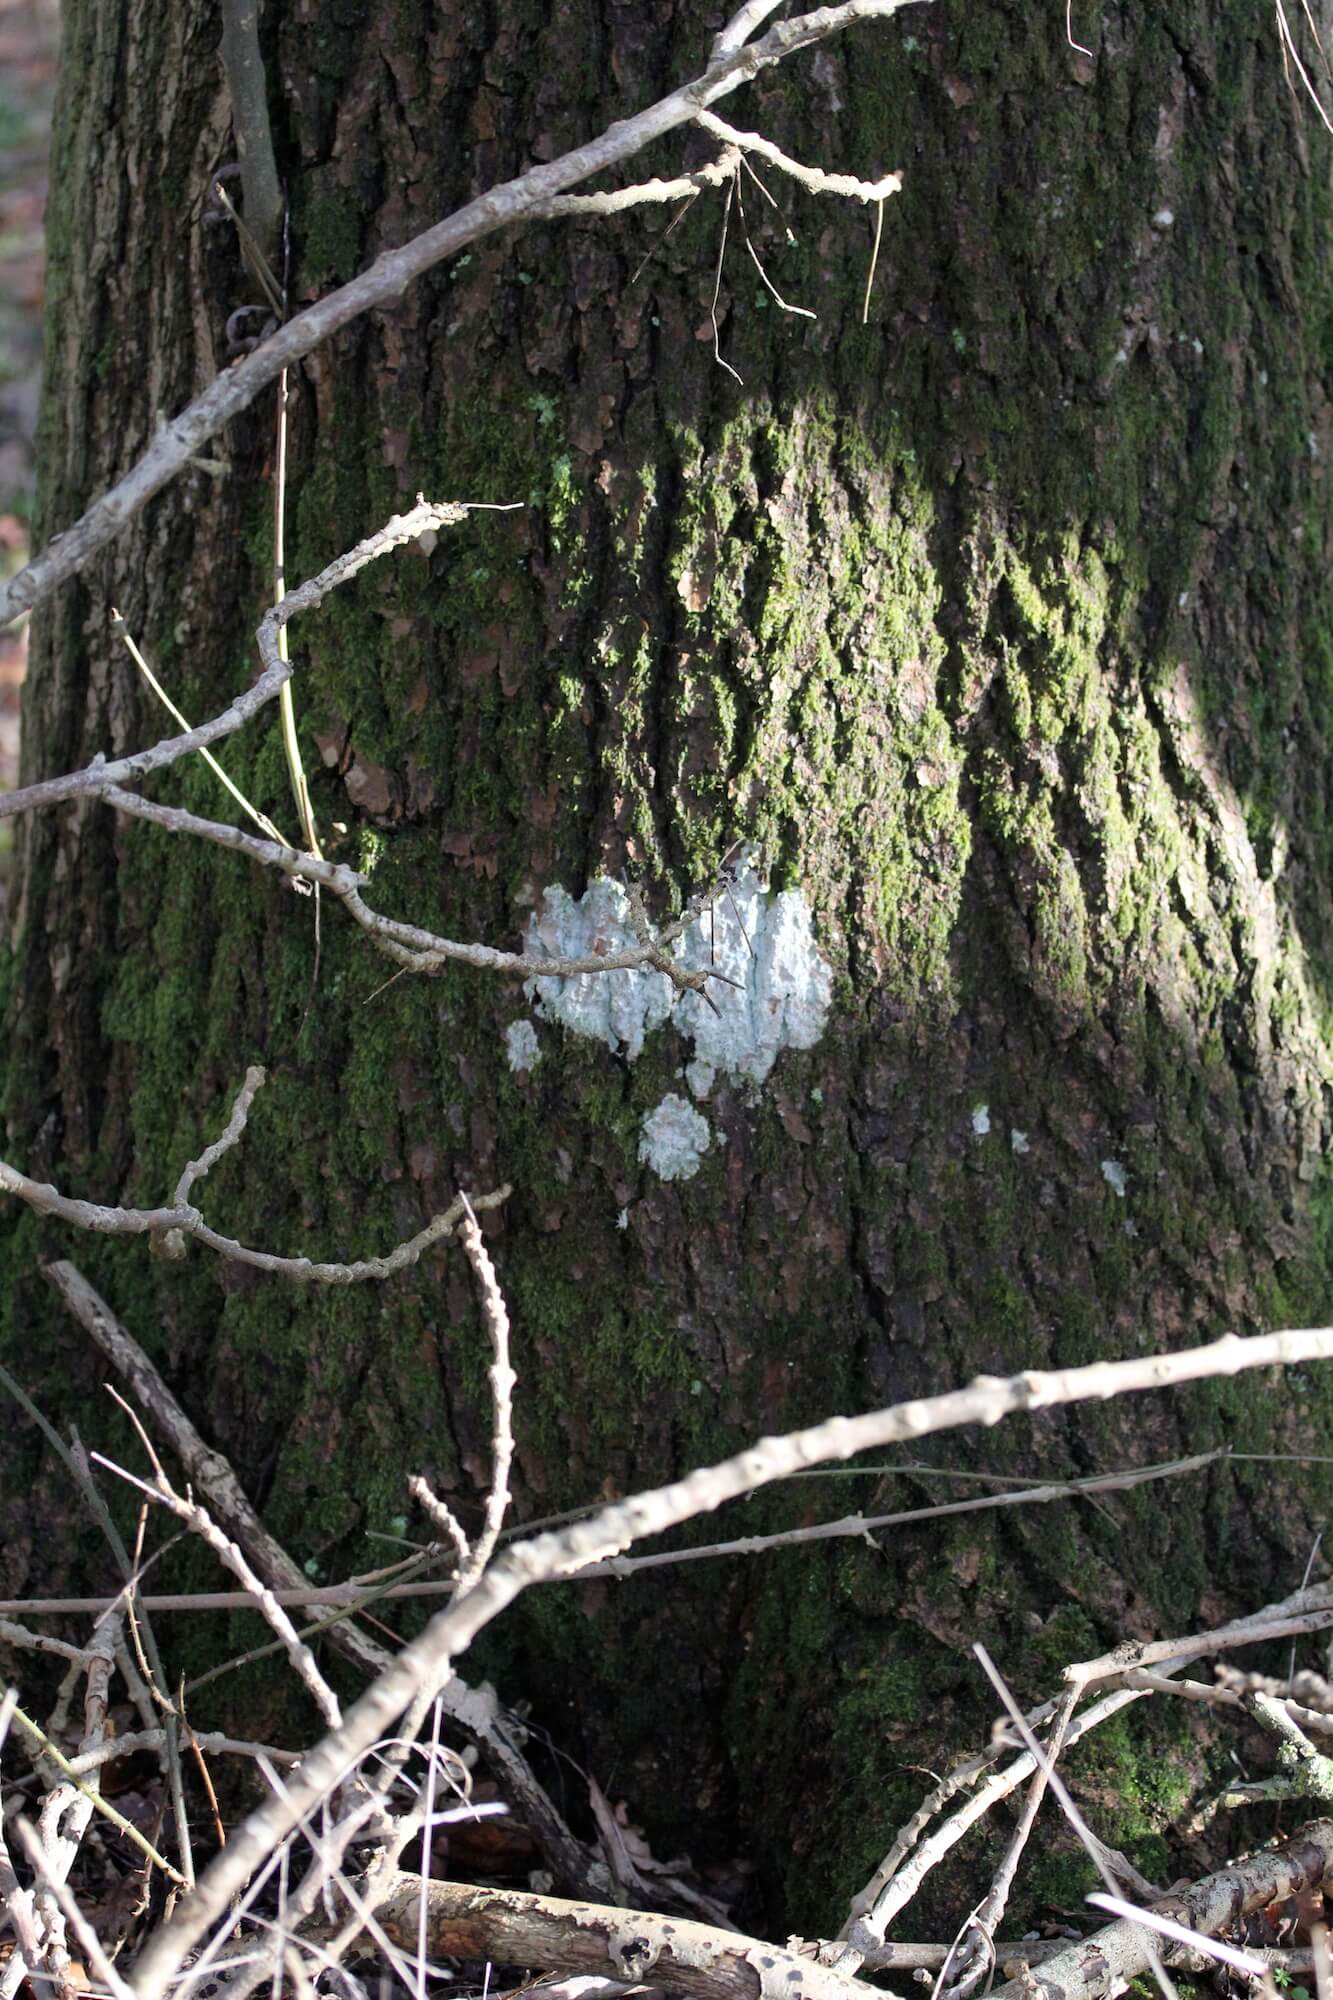 ancient wood tree trunk with white lichen in the shape of a heart